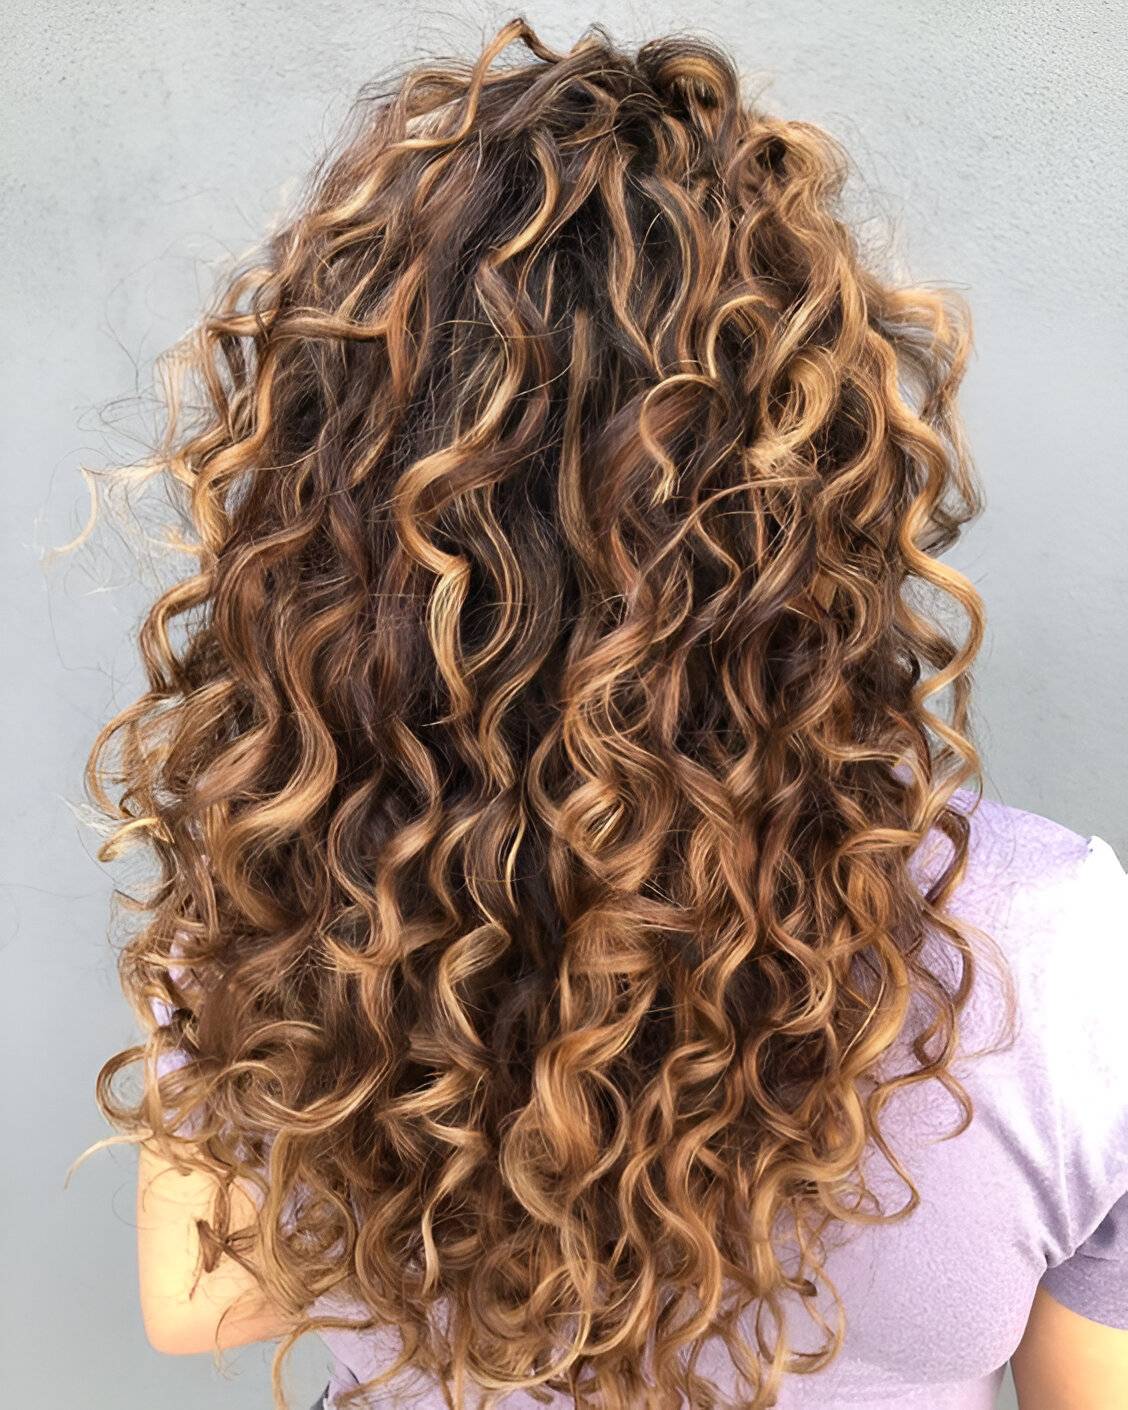 27 Gorgeous Golden Brown Hair Ideas To Make You Stunning Like A Model 24